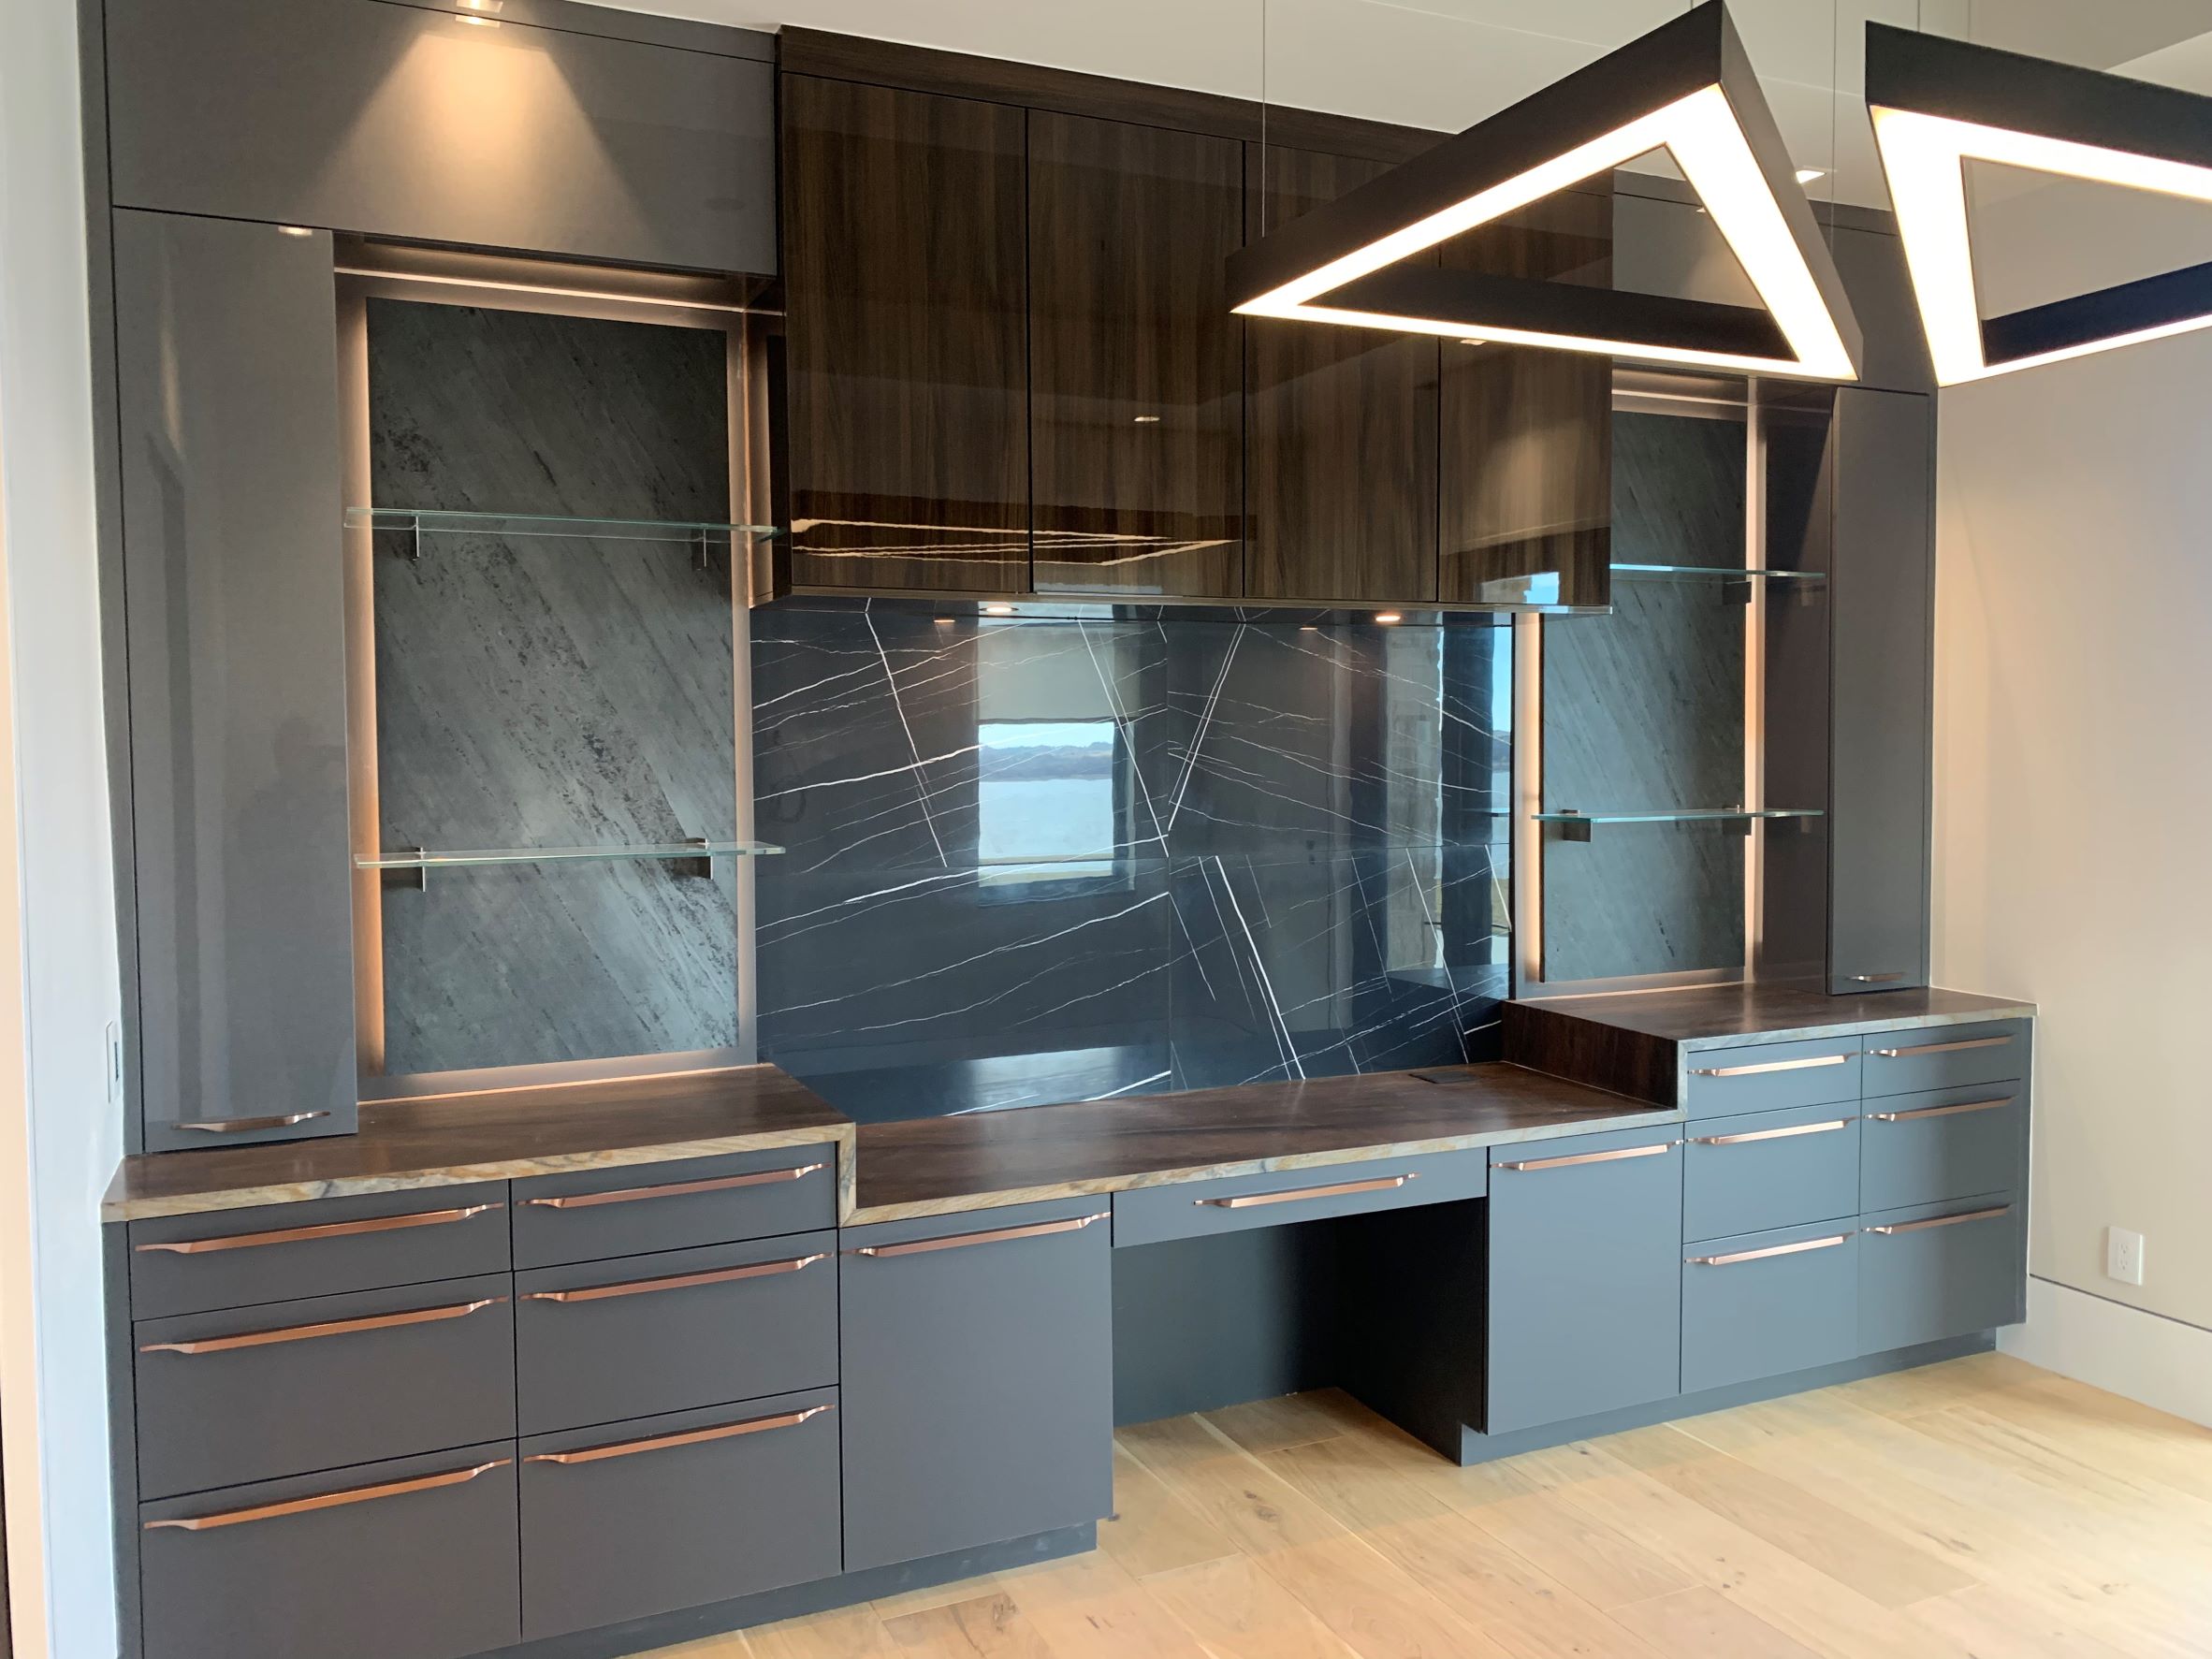 Luxury Office Cabinetry and Design by EKB Home